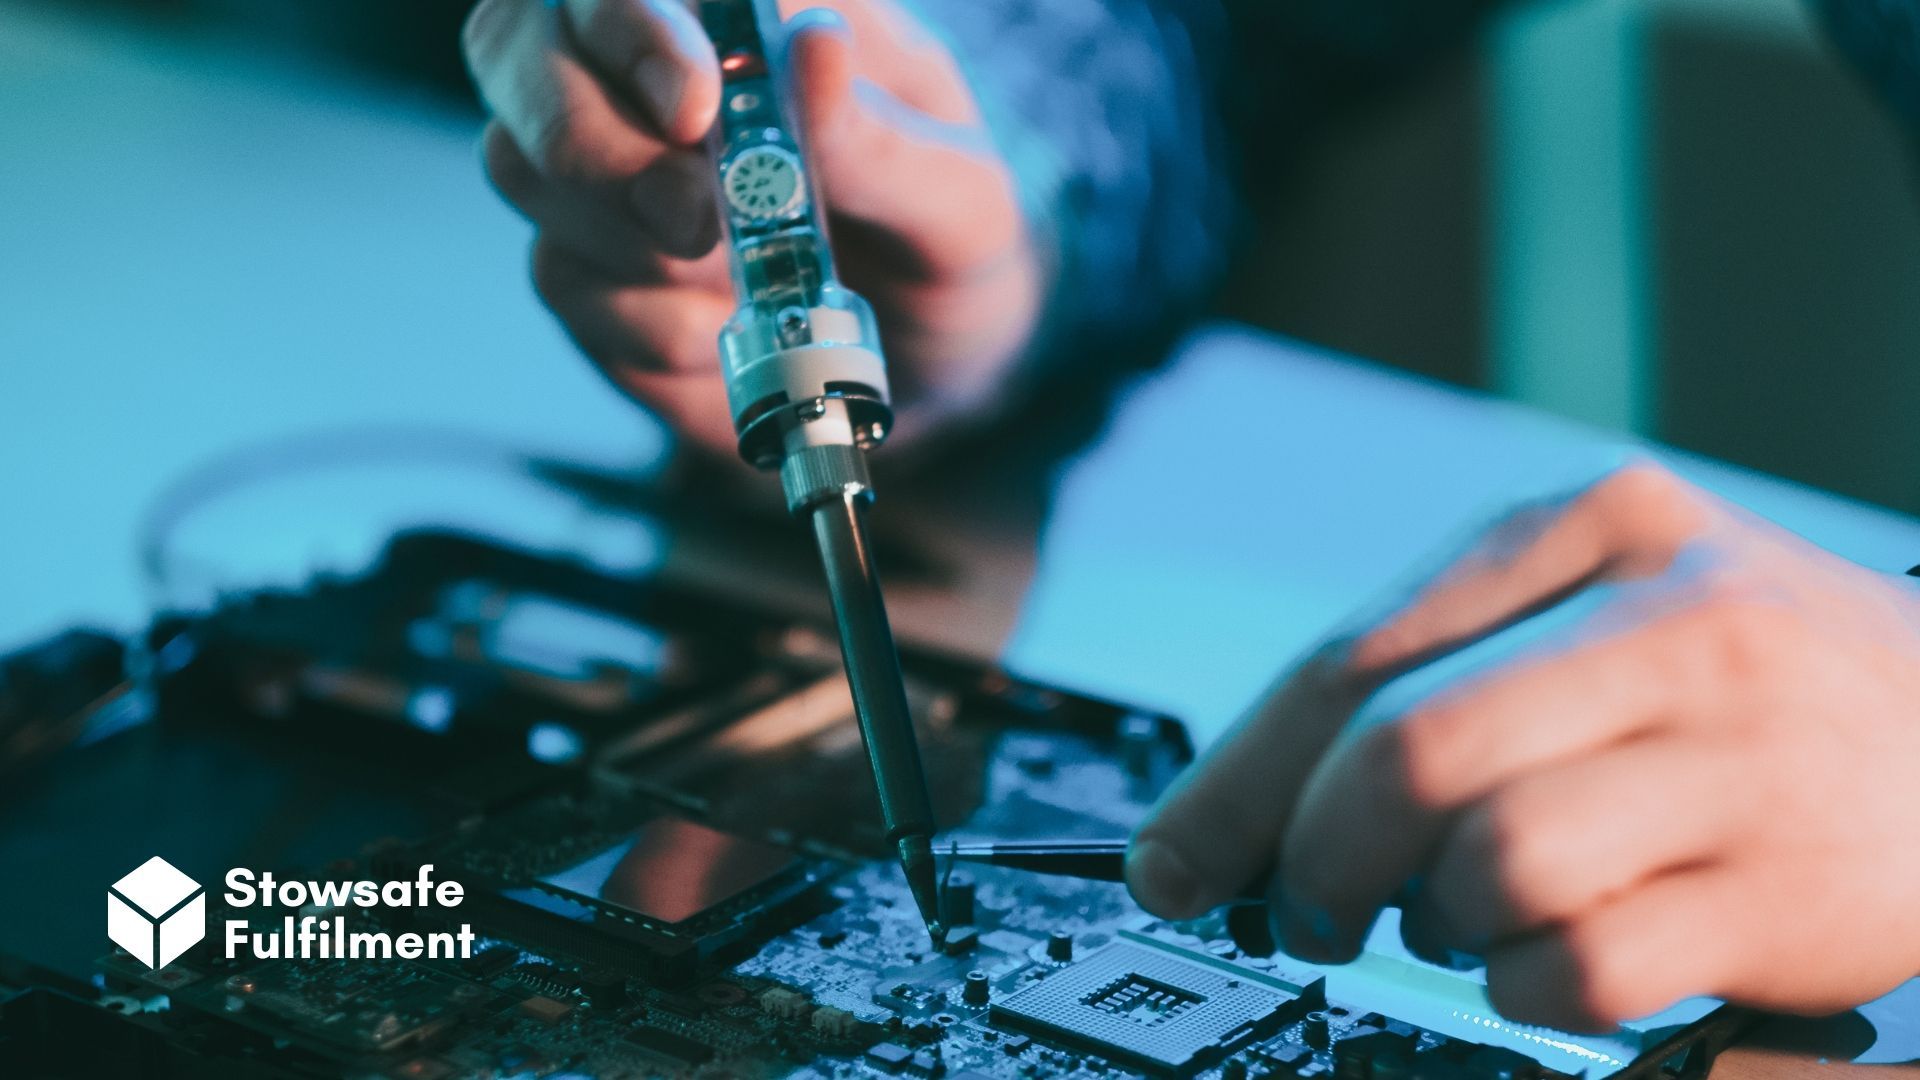 Discover how partnering with a 3PL can streamline electronics fulfilment. Stowsafe Fulfilment can help you overcome challenges and grow your business.